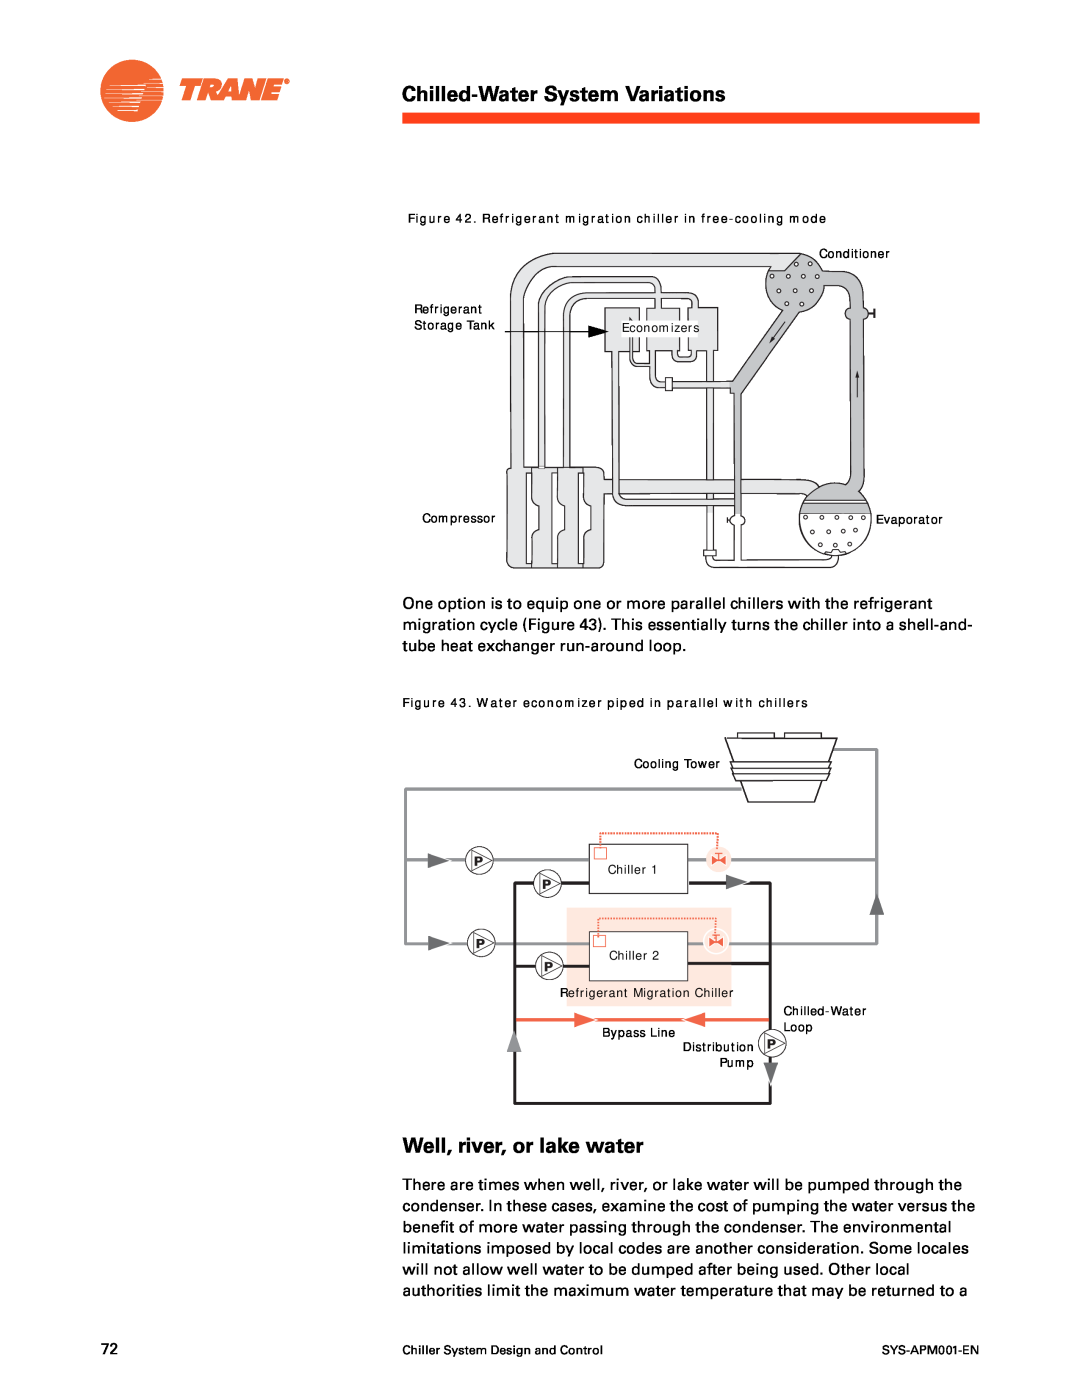 Trane SYS-APM001-EN manual Well, river, or lake water, Chilled-Water System Variations 